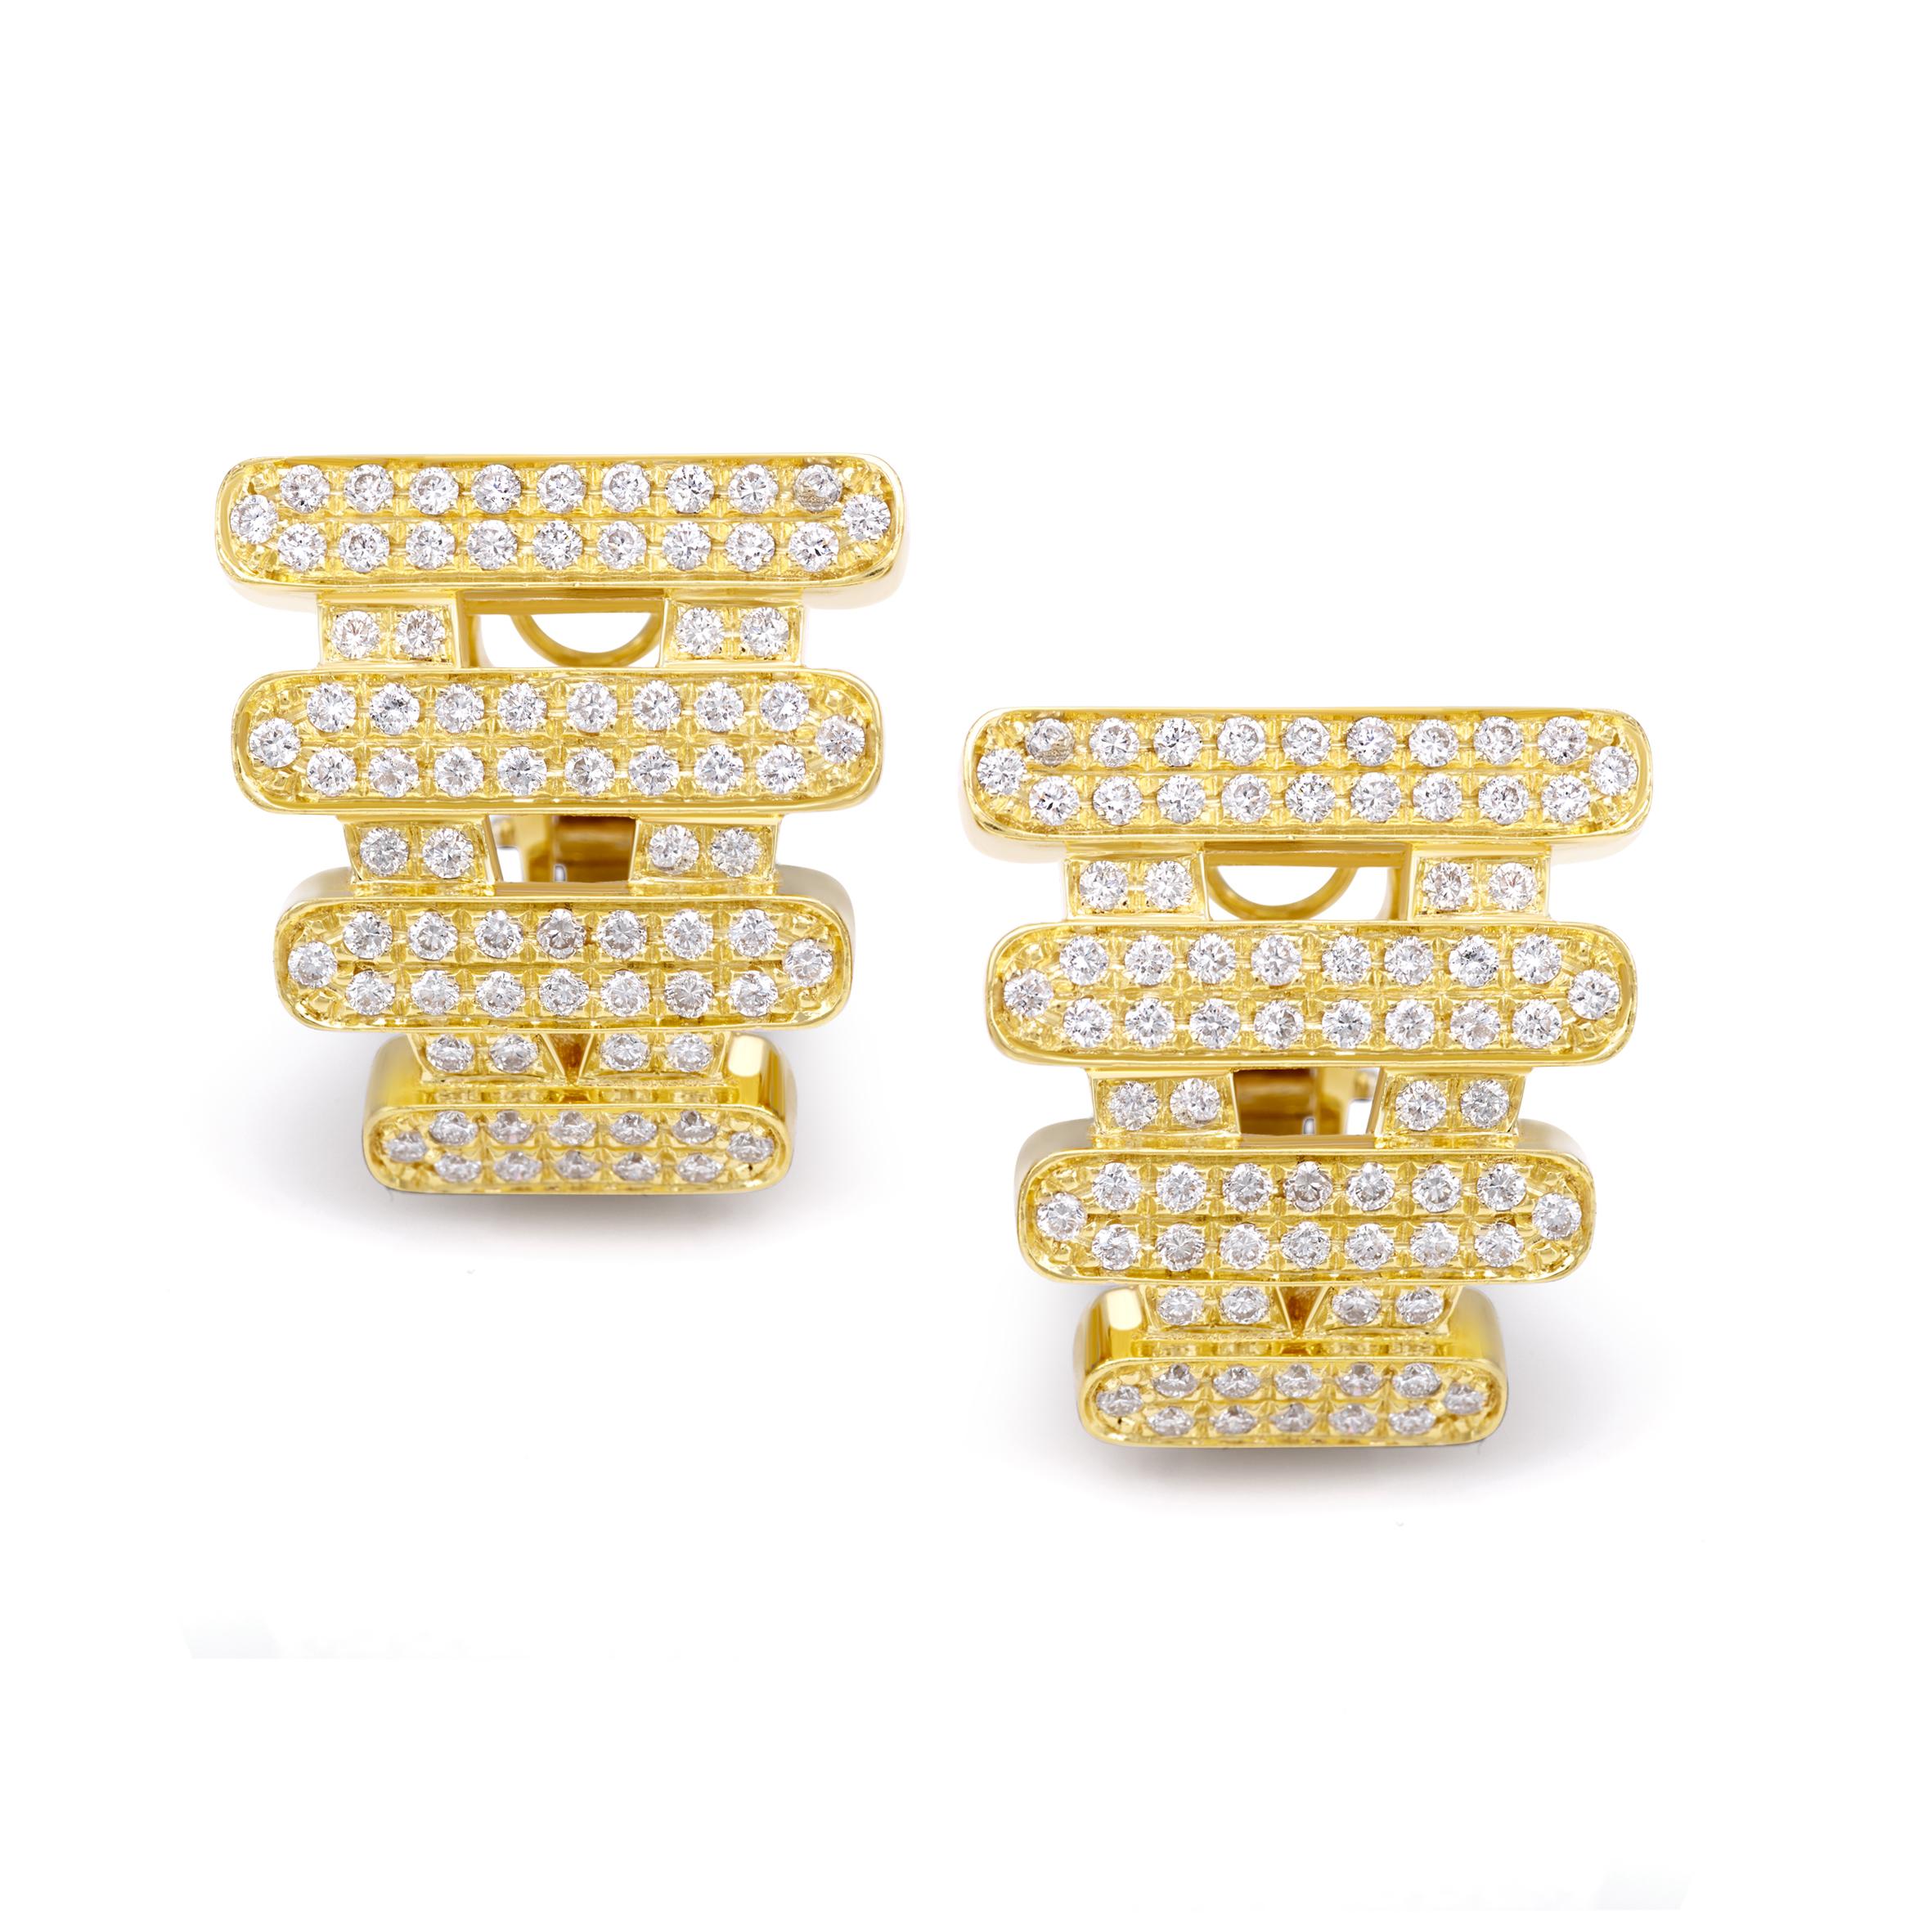 Brilliant Cut Earrings Collection 